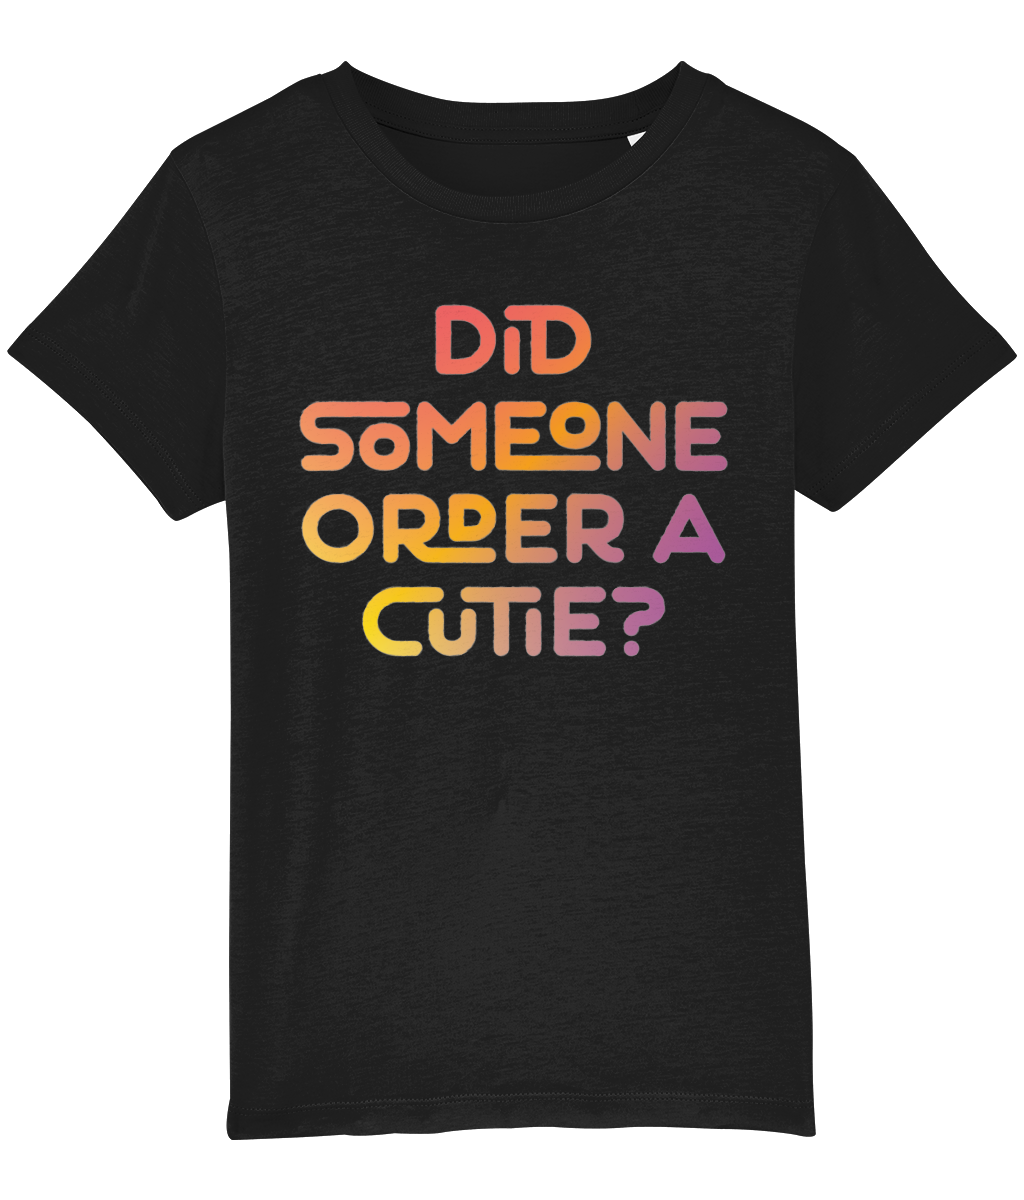 Did someone order a cutie? Kid's t-shirt for a little cutie, ideal gift